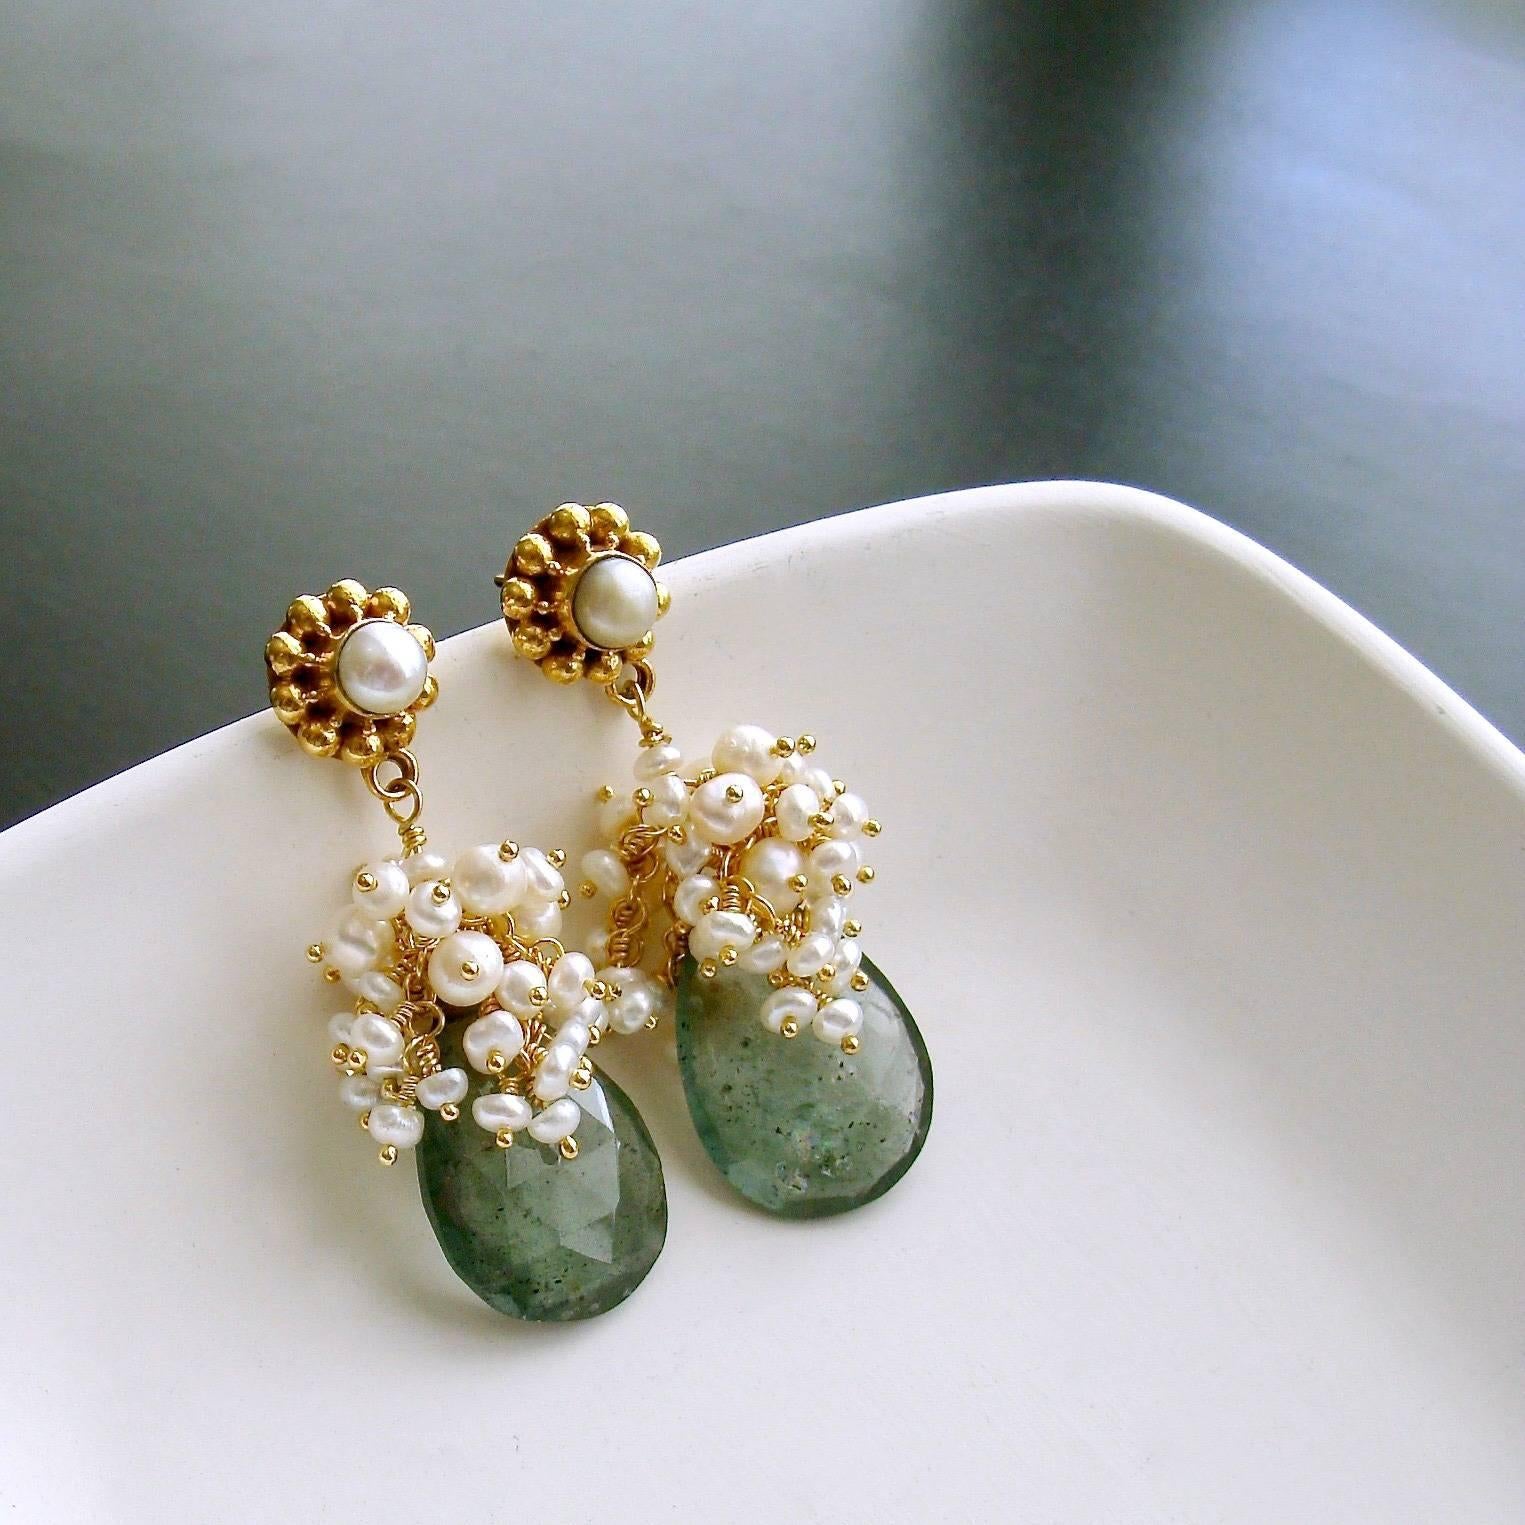 Les Fleurs de la Mer II Earrings.

Moss aquamarine is one of the most coveted stones - perhaps for its rarity or simply for its complex coloring - which almost defies description, but is best described as dusty aquamarine.  Gorgeous deep aquamarine